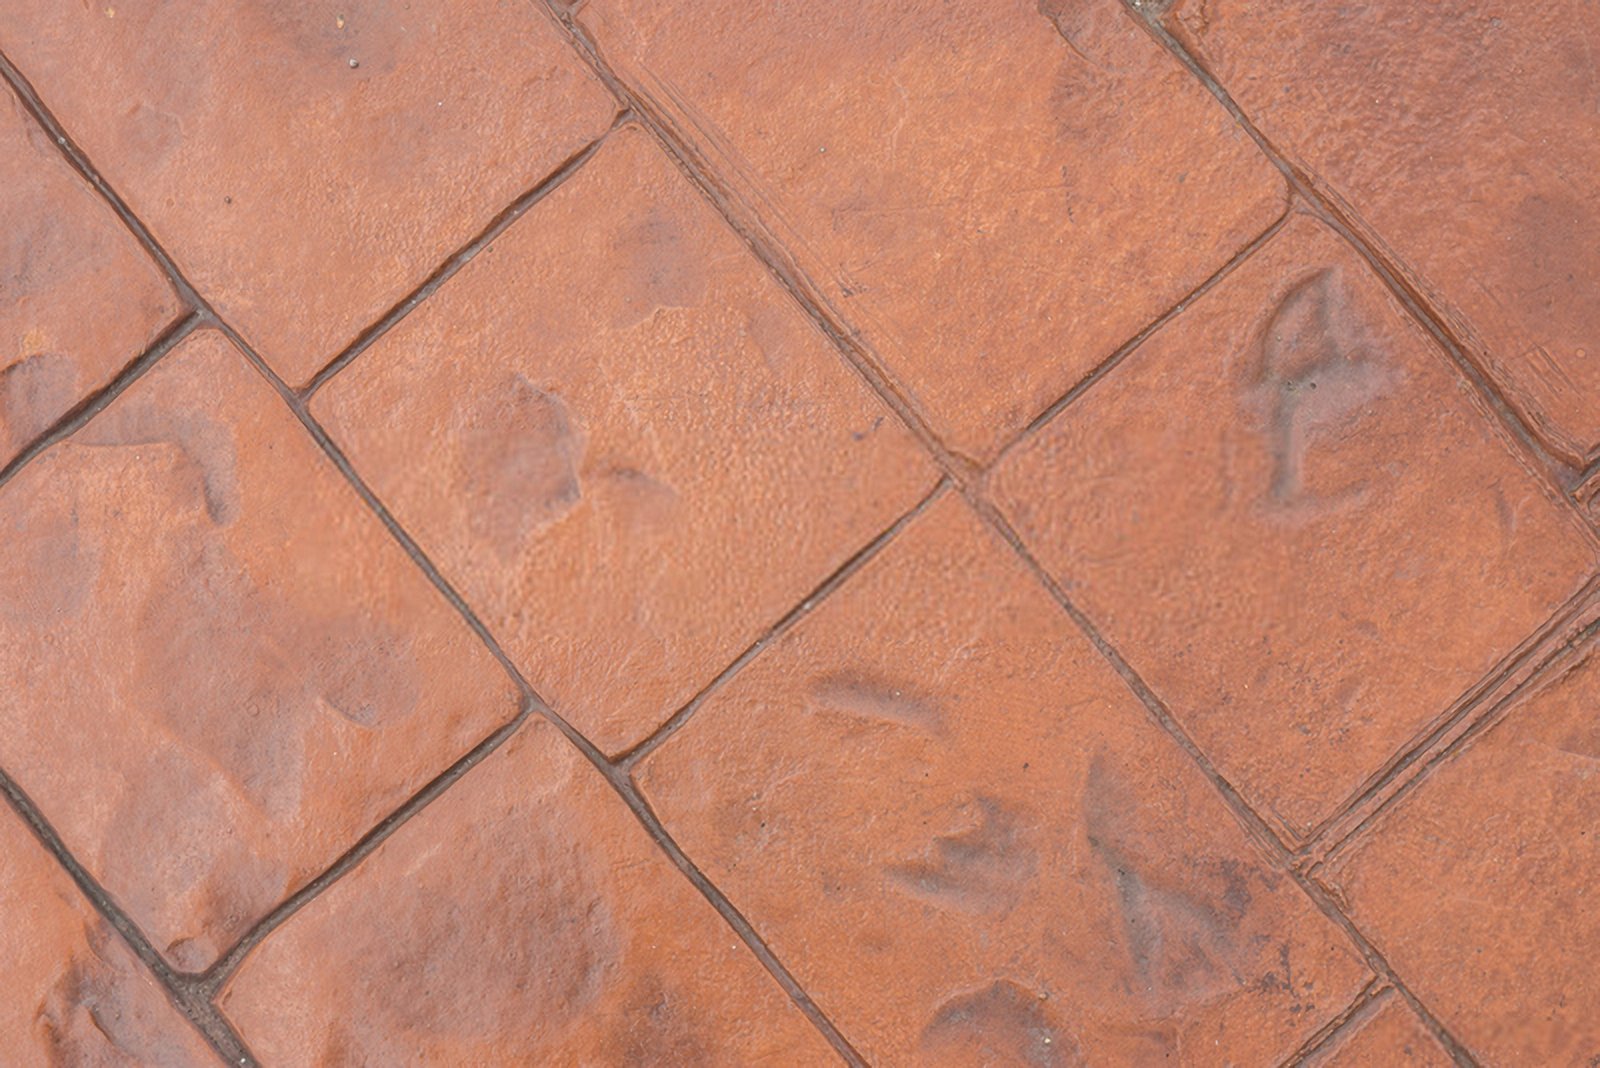 A close-up view of a ground surface featuring reddish-brown, square-shaped tiles arranged in a diagonal pattern. The tiles, likely installed by a stamped concrete contractor in Palm Beach County, have a textured, slightly worn appearance with some faint imprints and small imperfections visible on their surfaces.